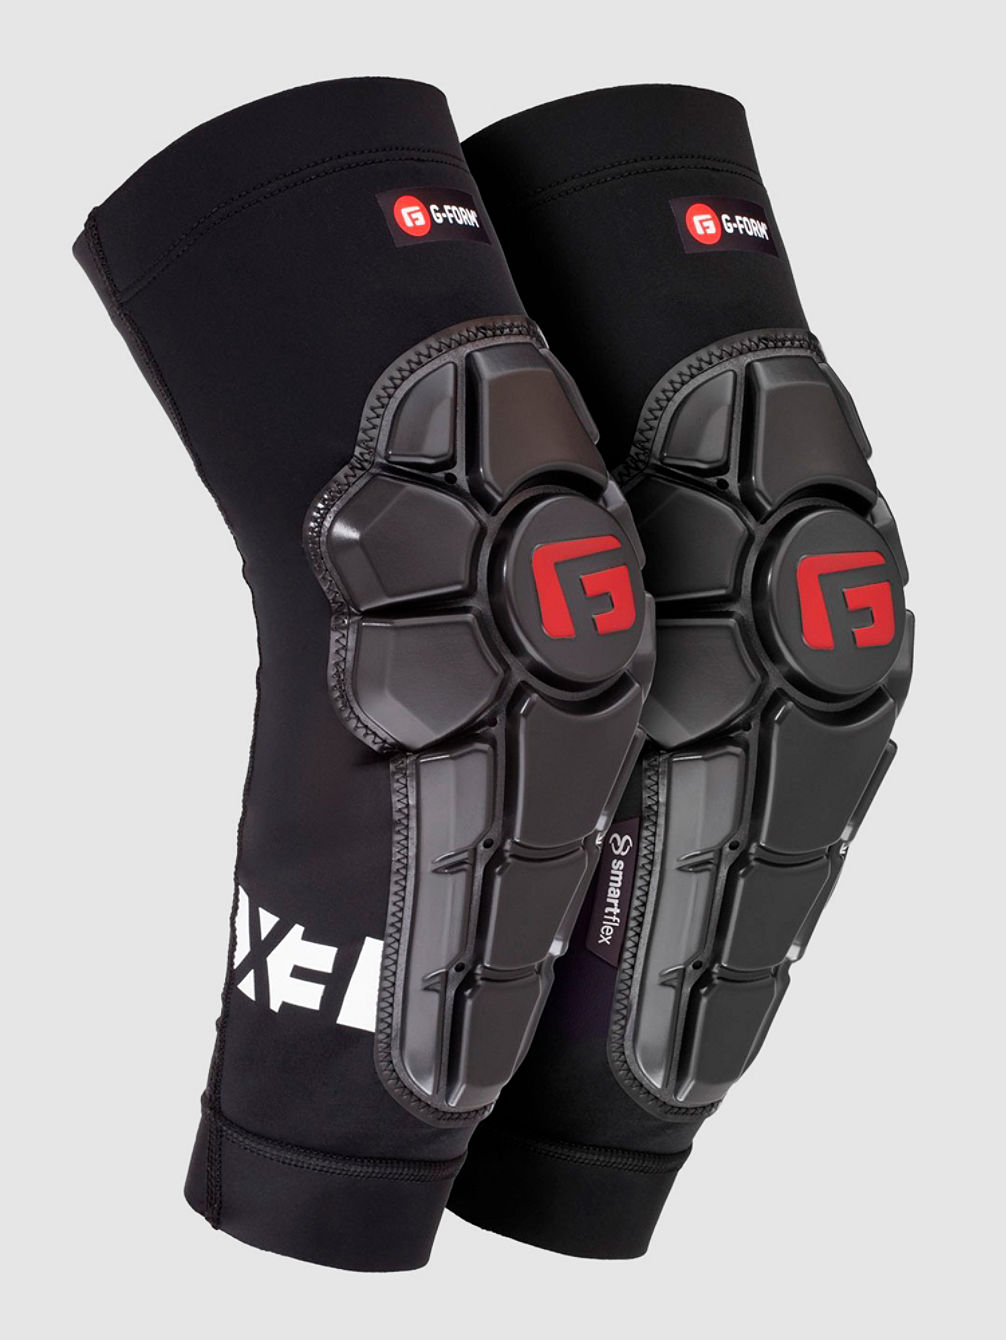 Pro-X3 Guard Elbow Protection